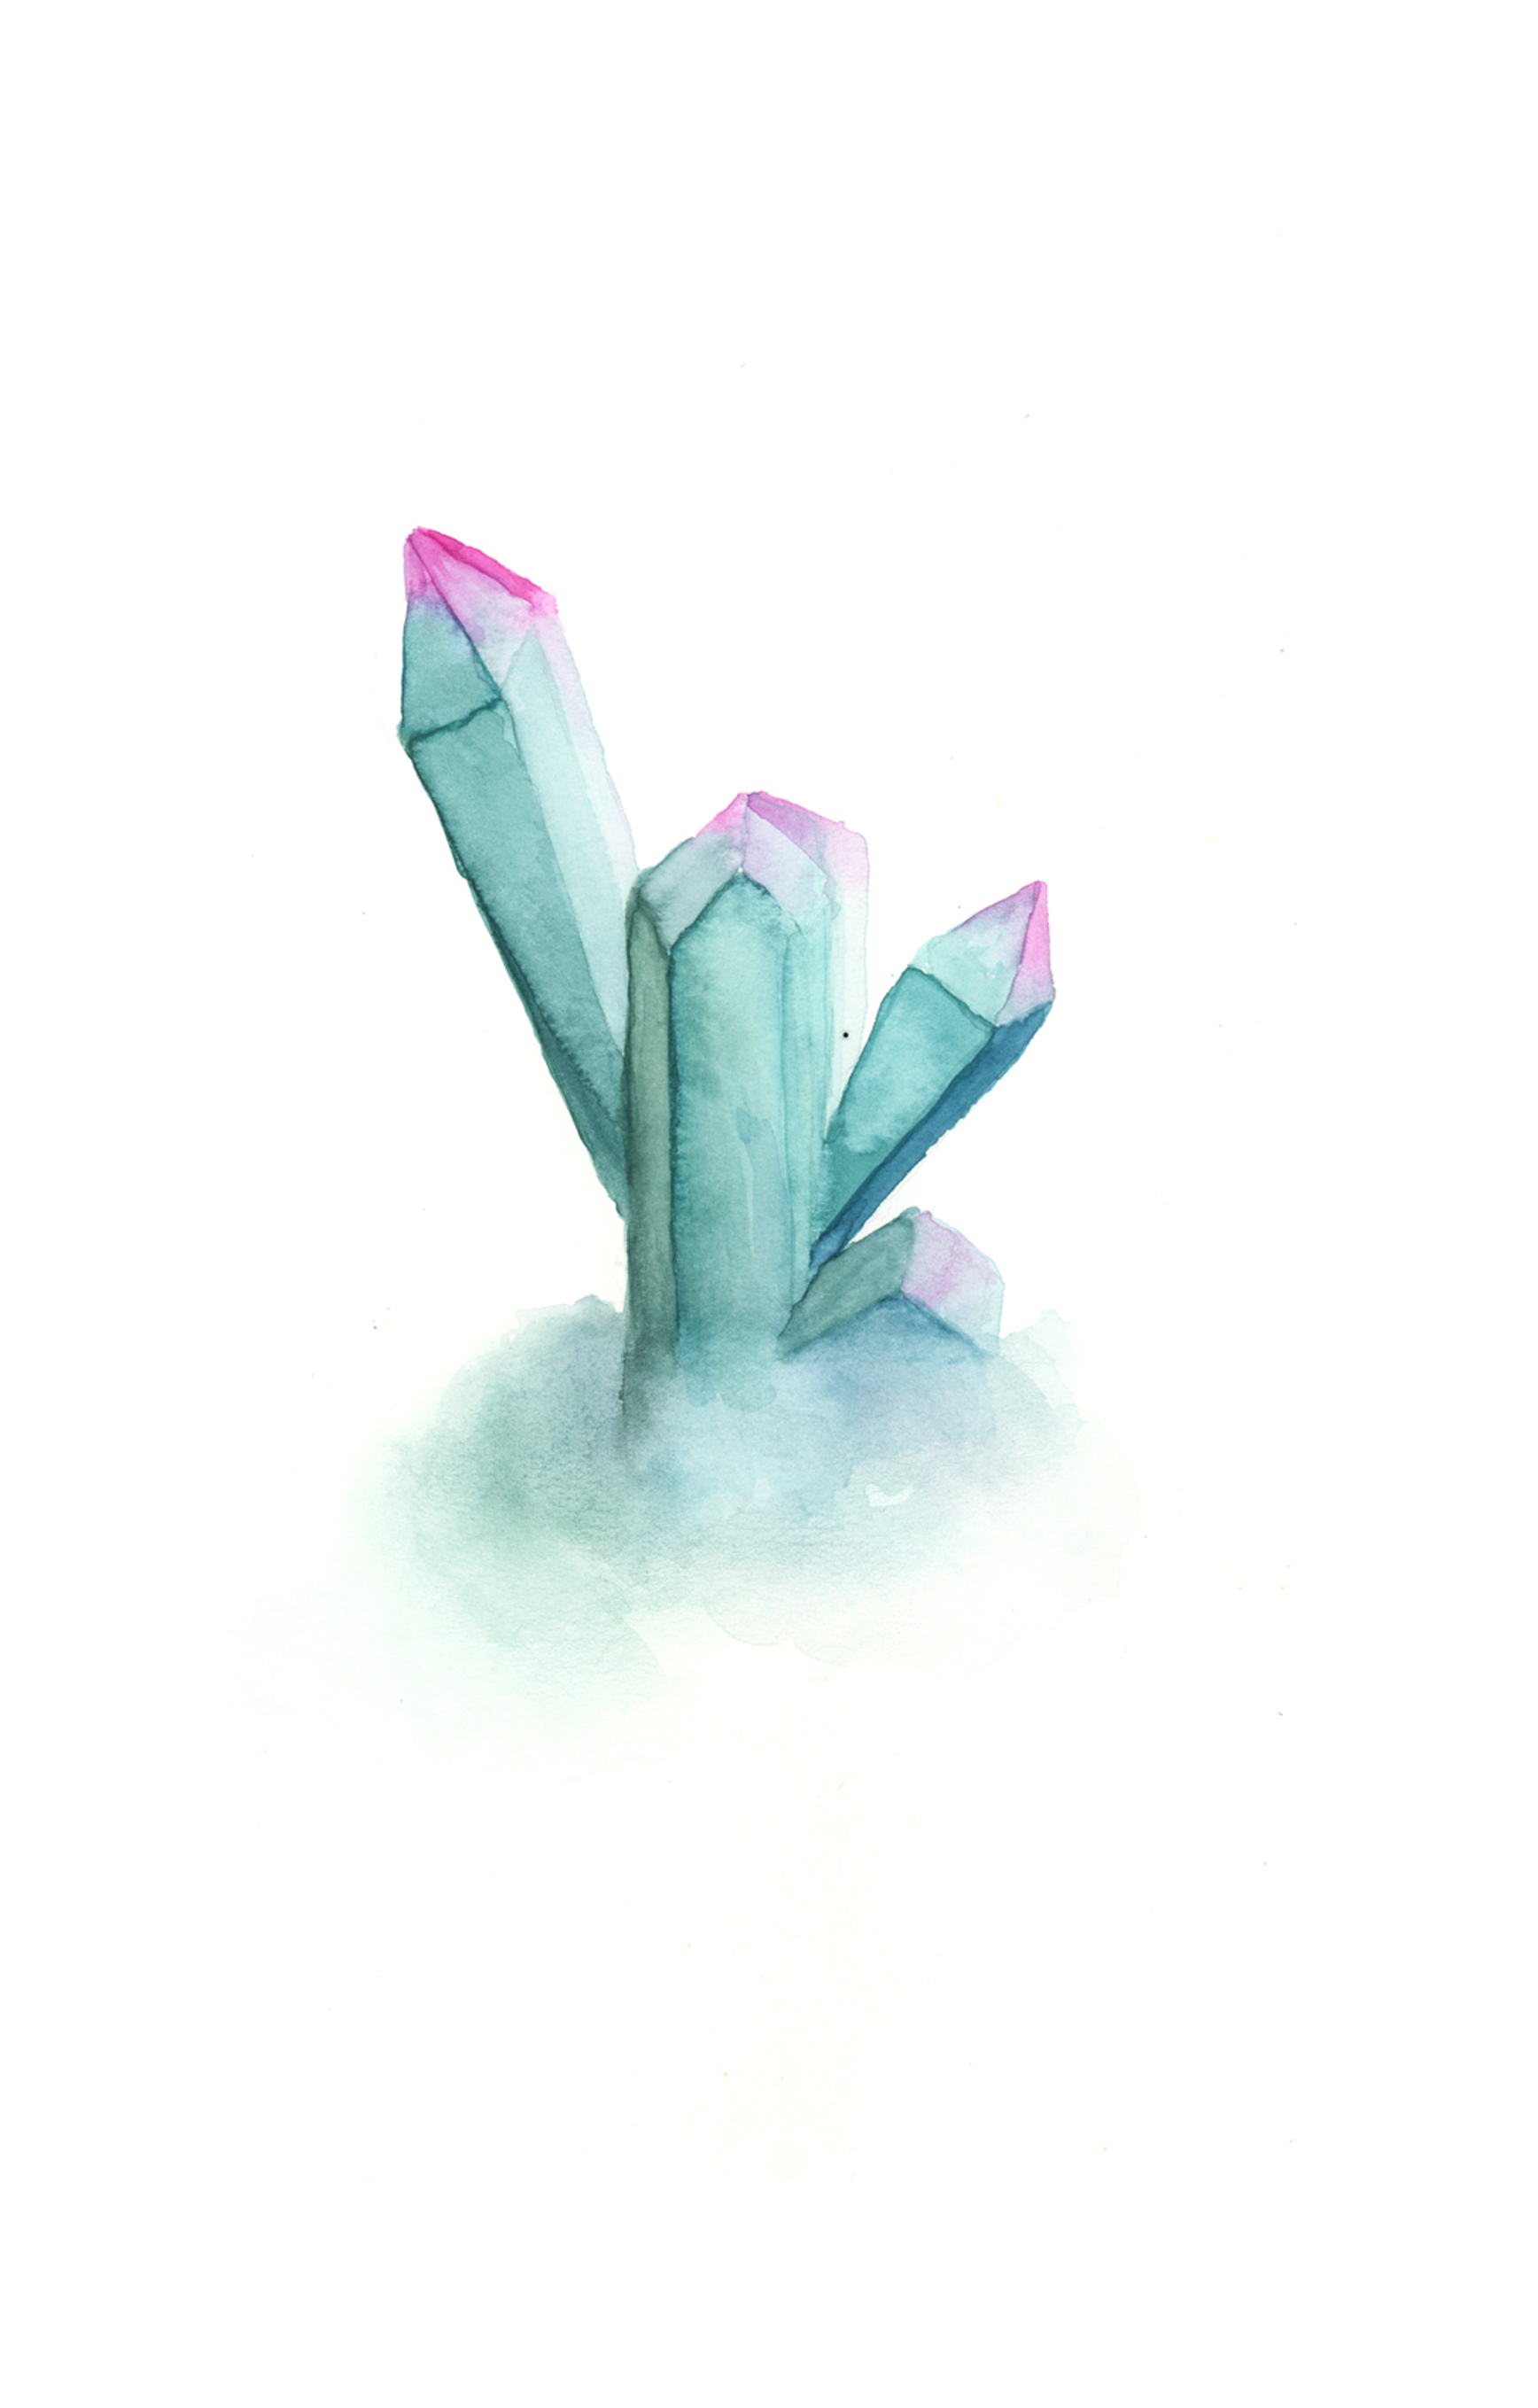 FREE DOWNLOAD: Watercolor Crystal iPhone Background